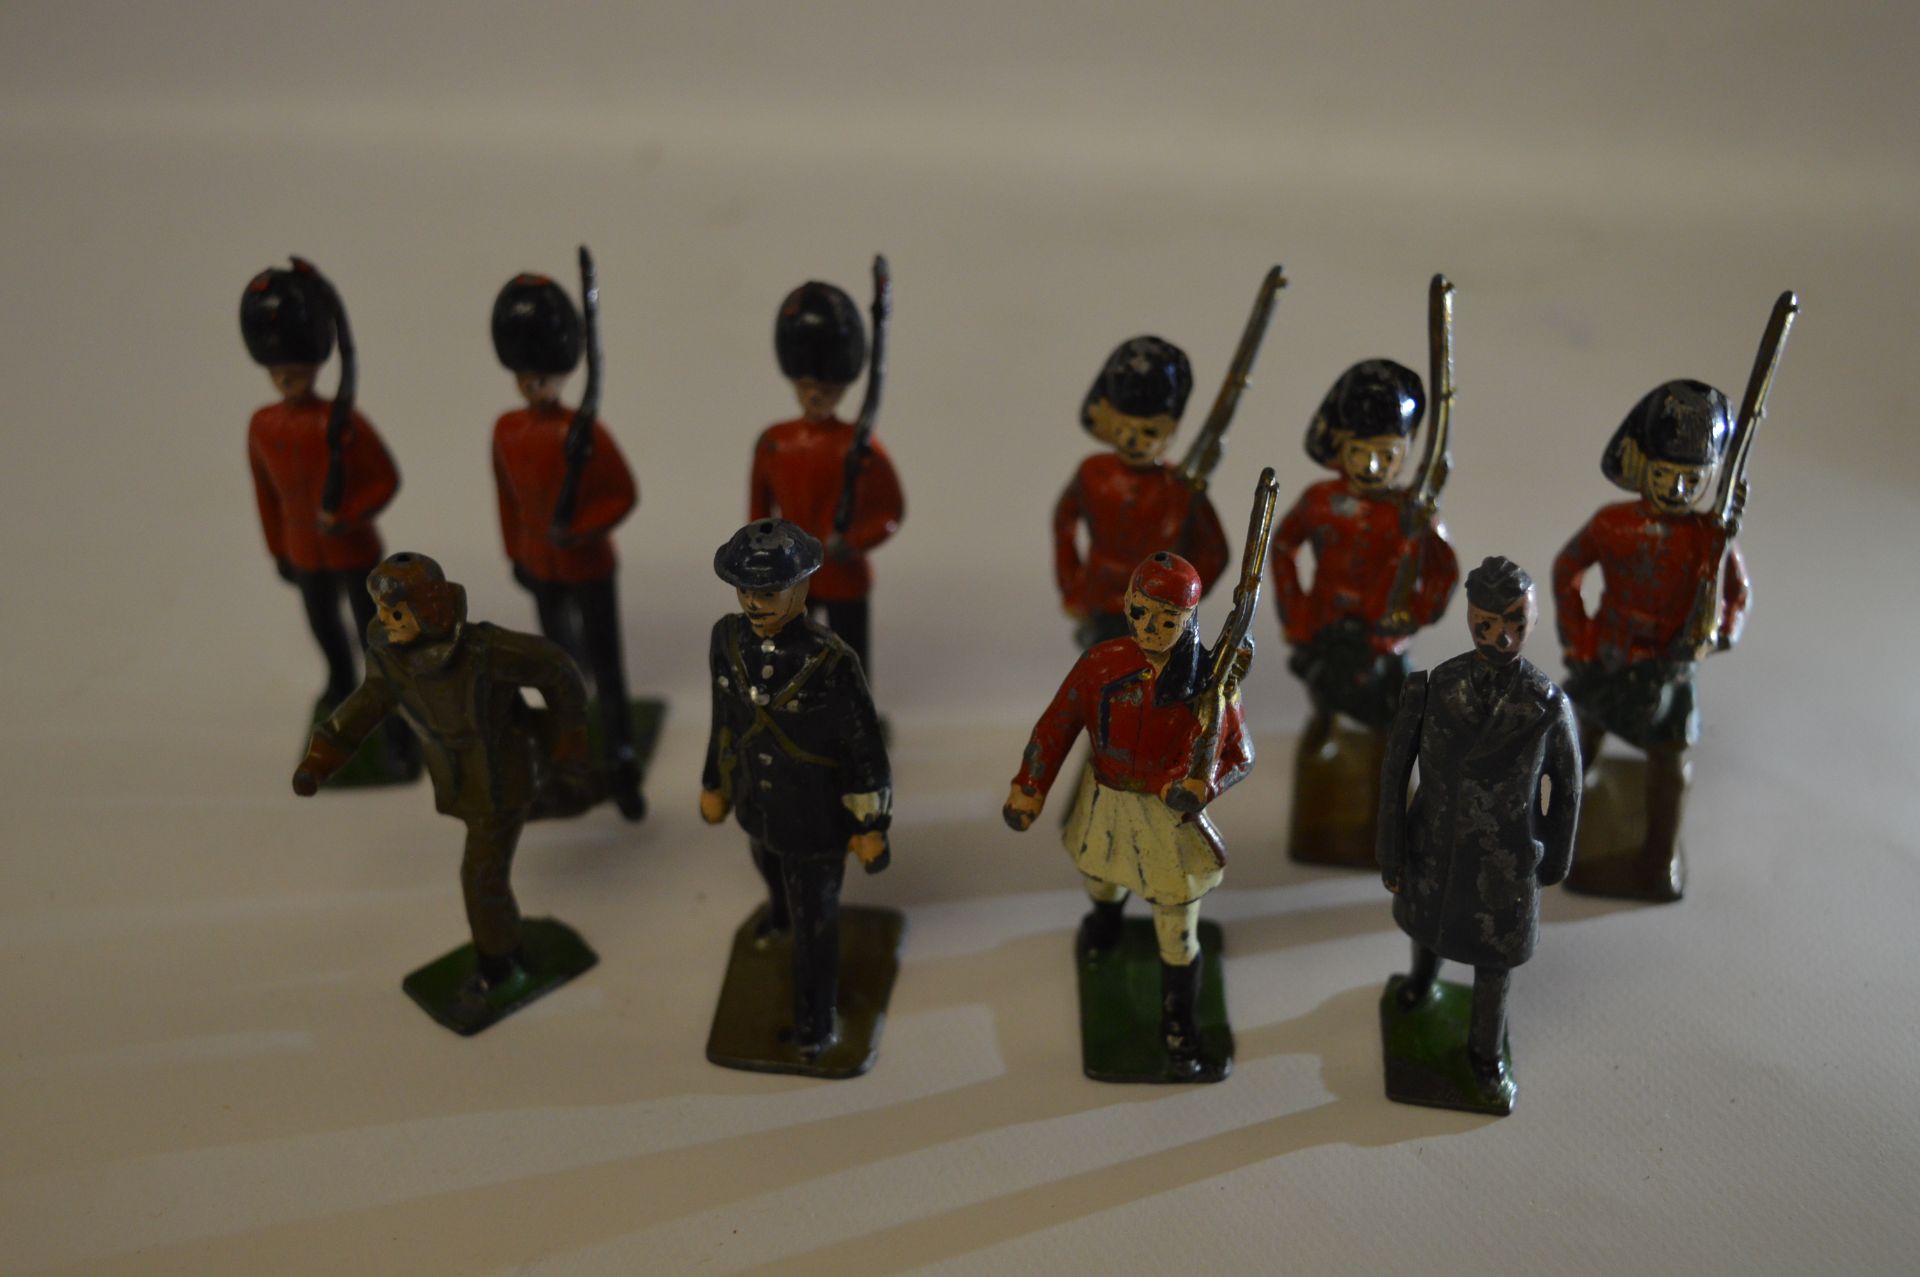 Diecast Figures "British Soldiers" J.Hill & Co